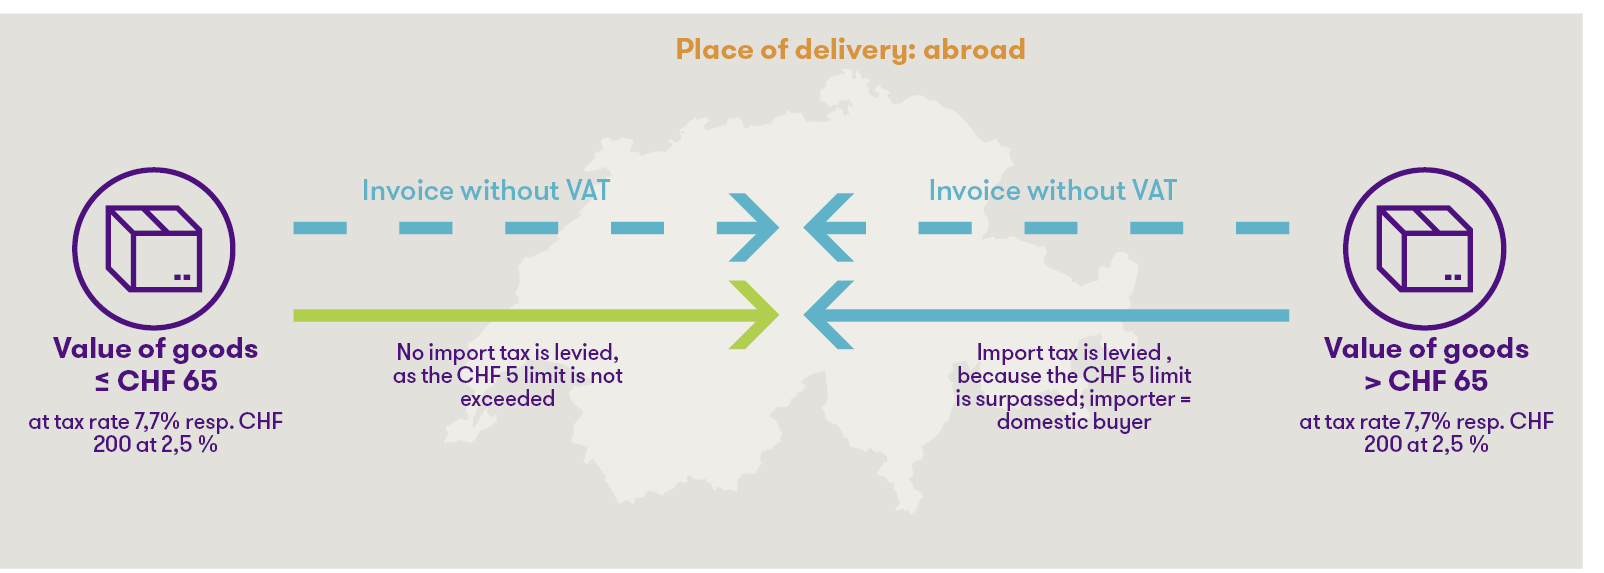 Value-added tax liability for shipping to Switzerland for delivery abroad